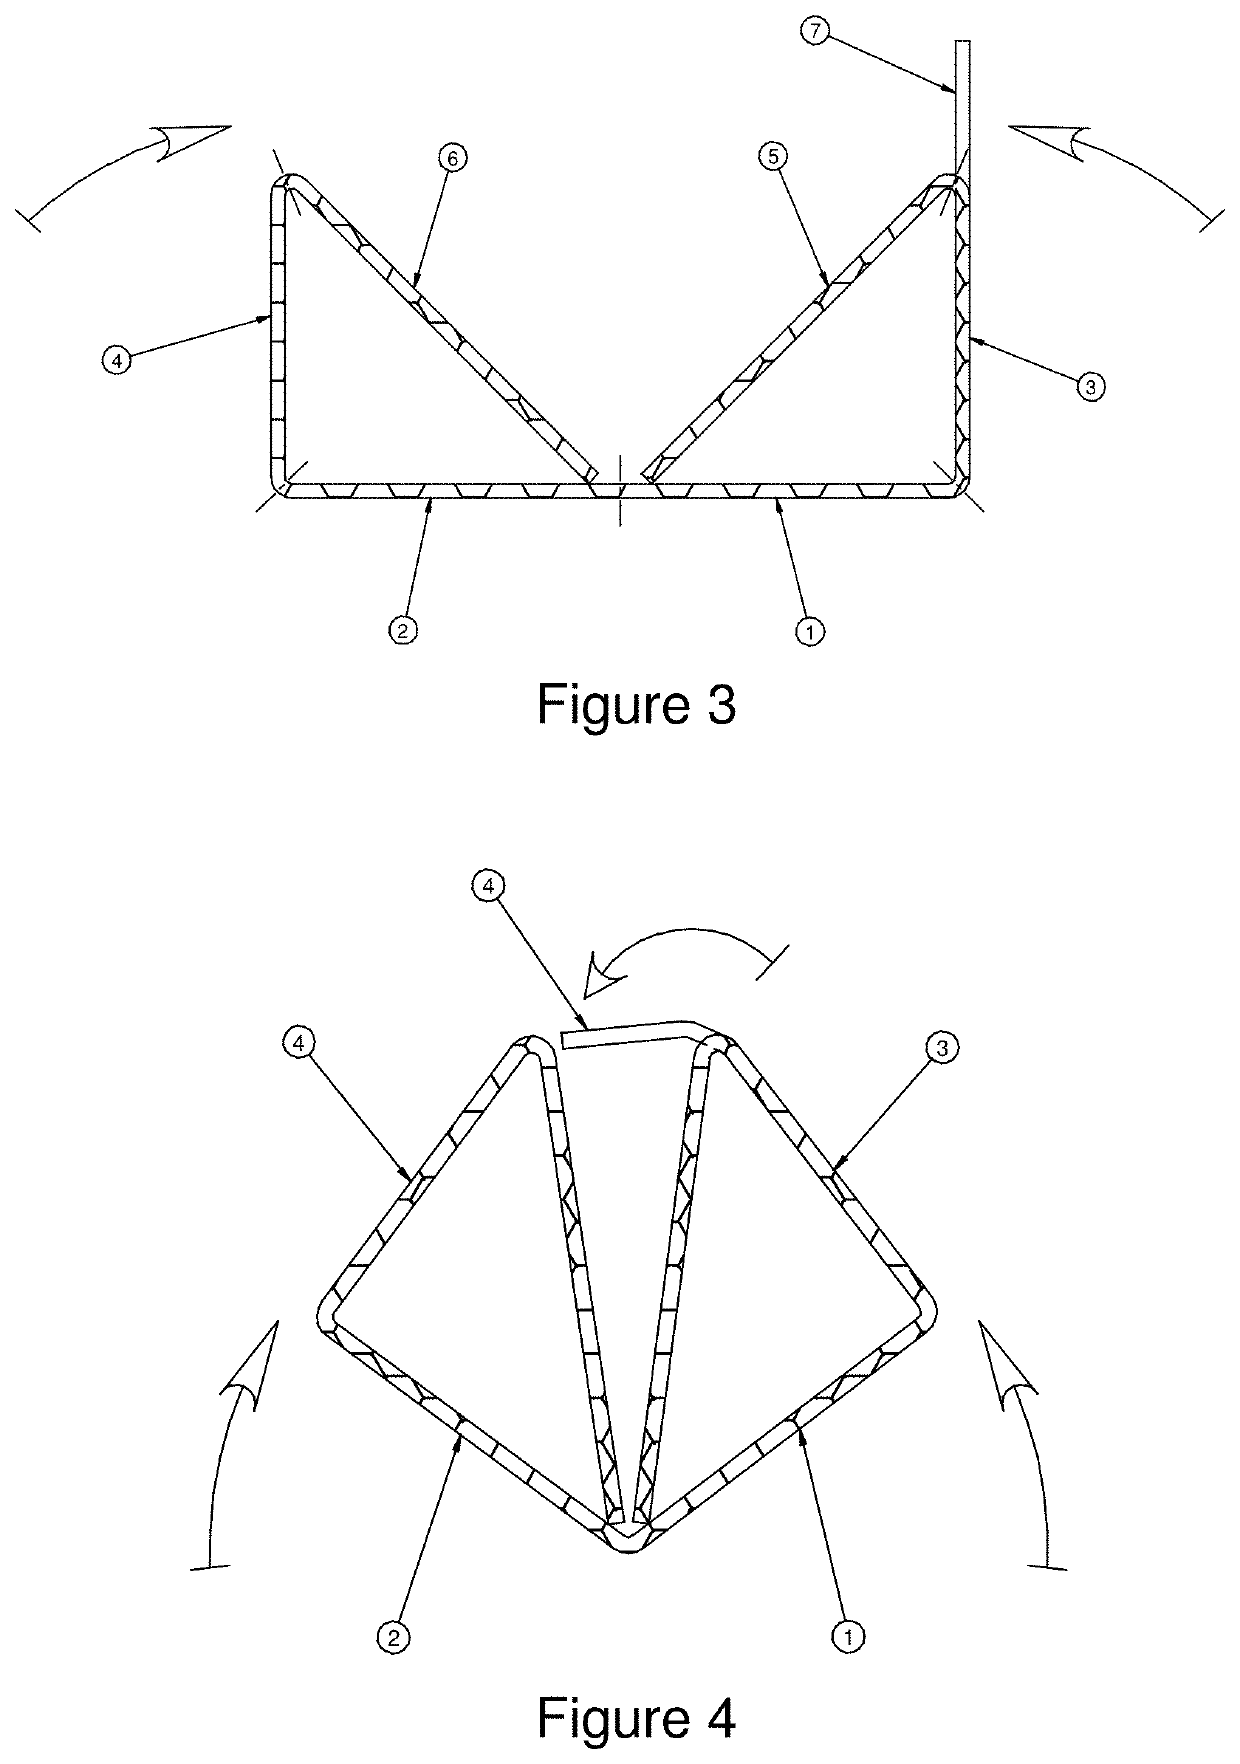 Tubular structural profile and construction system, produced by cutting and folding a semi-rigid and foldable sheet, with 4 substantially orthoginal layers joined at fold lines and internal diagonal layers joining two opposing fold lines, and at least one tongue which coincides with at least one slot